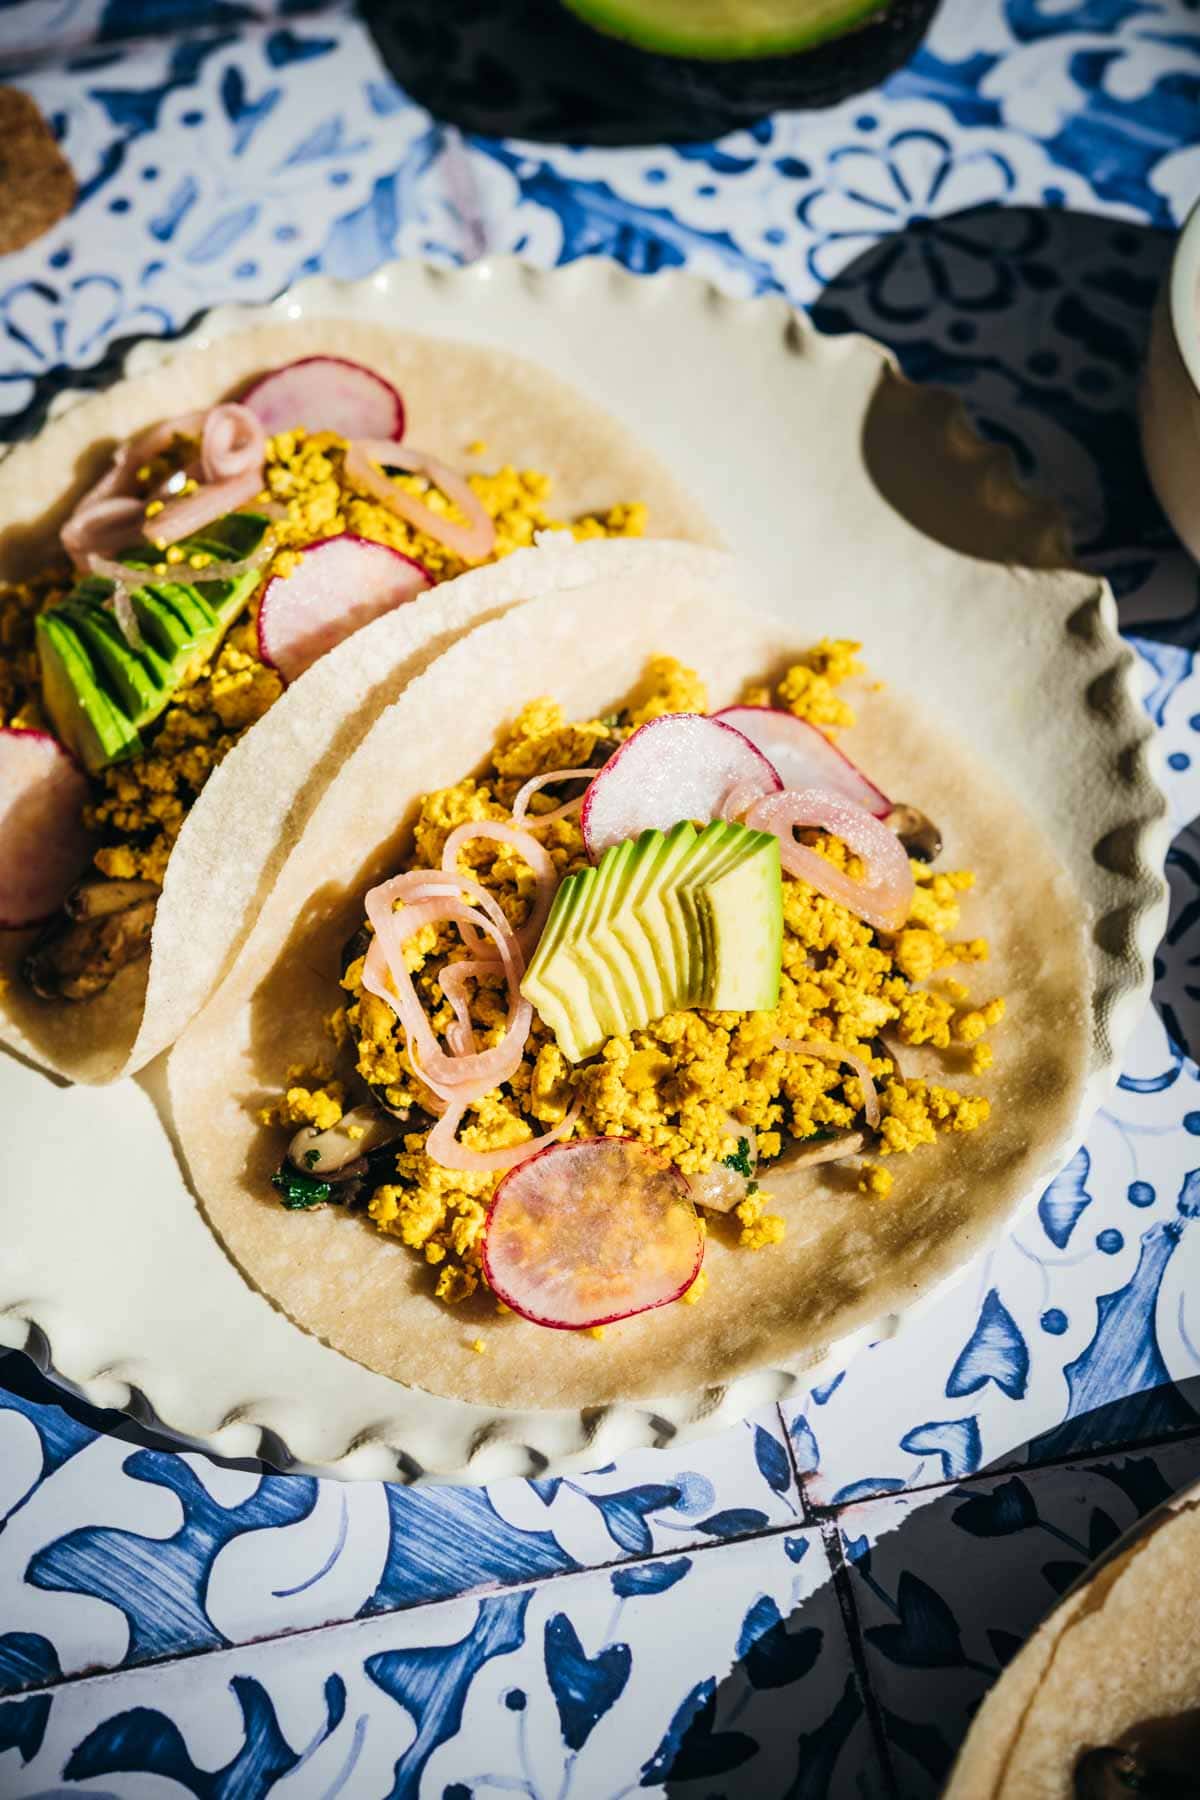 Two tacos on a plate, garnished with onion, radish and avocados.